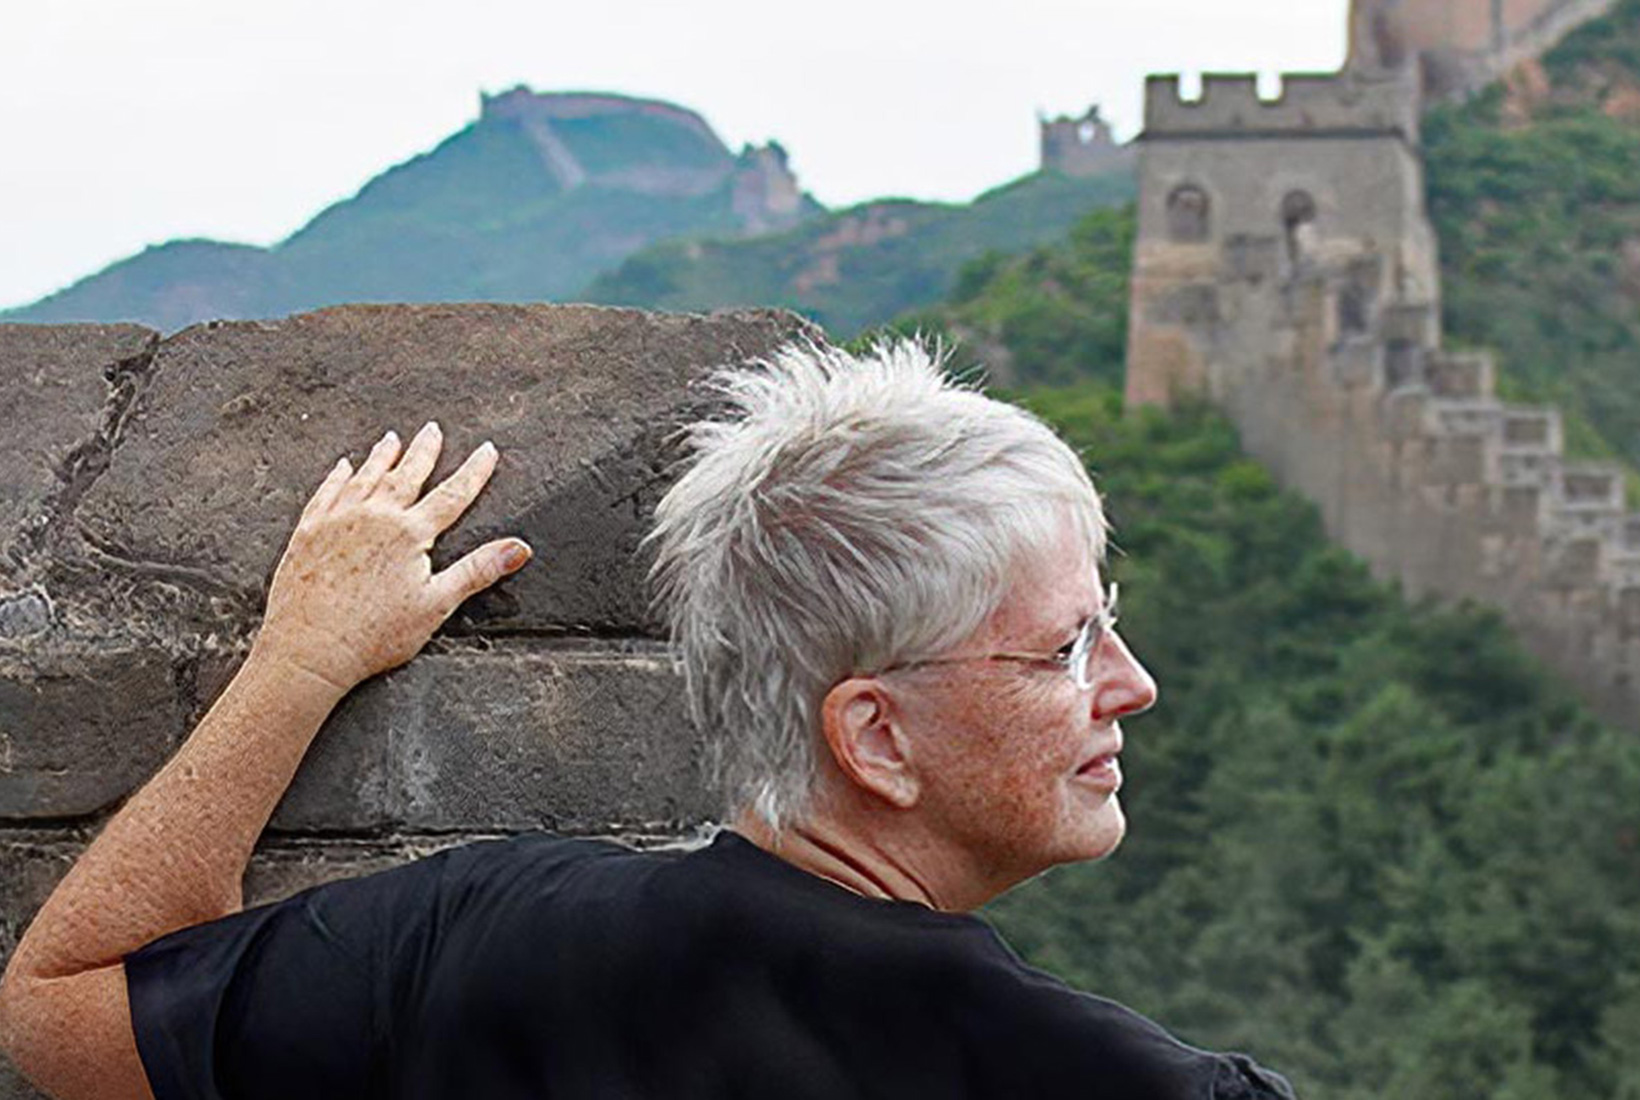 Barbara Weibel atop the Great Wall of China in the Jinshanling District, where she was allowed to camp overnight